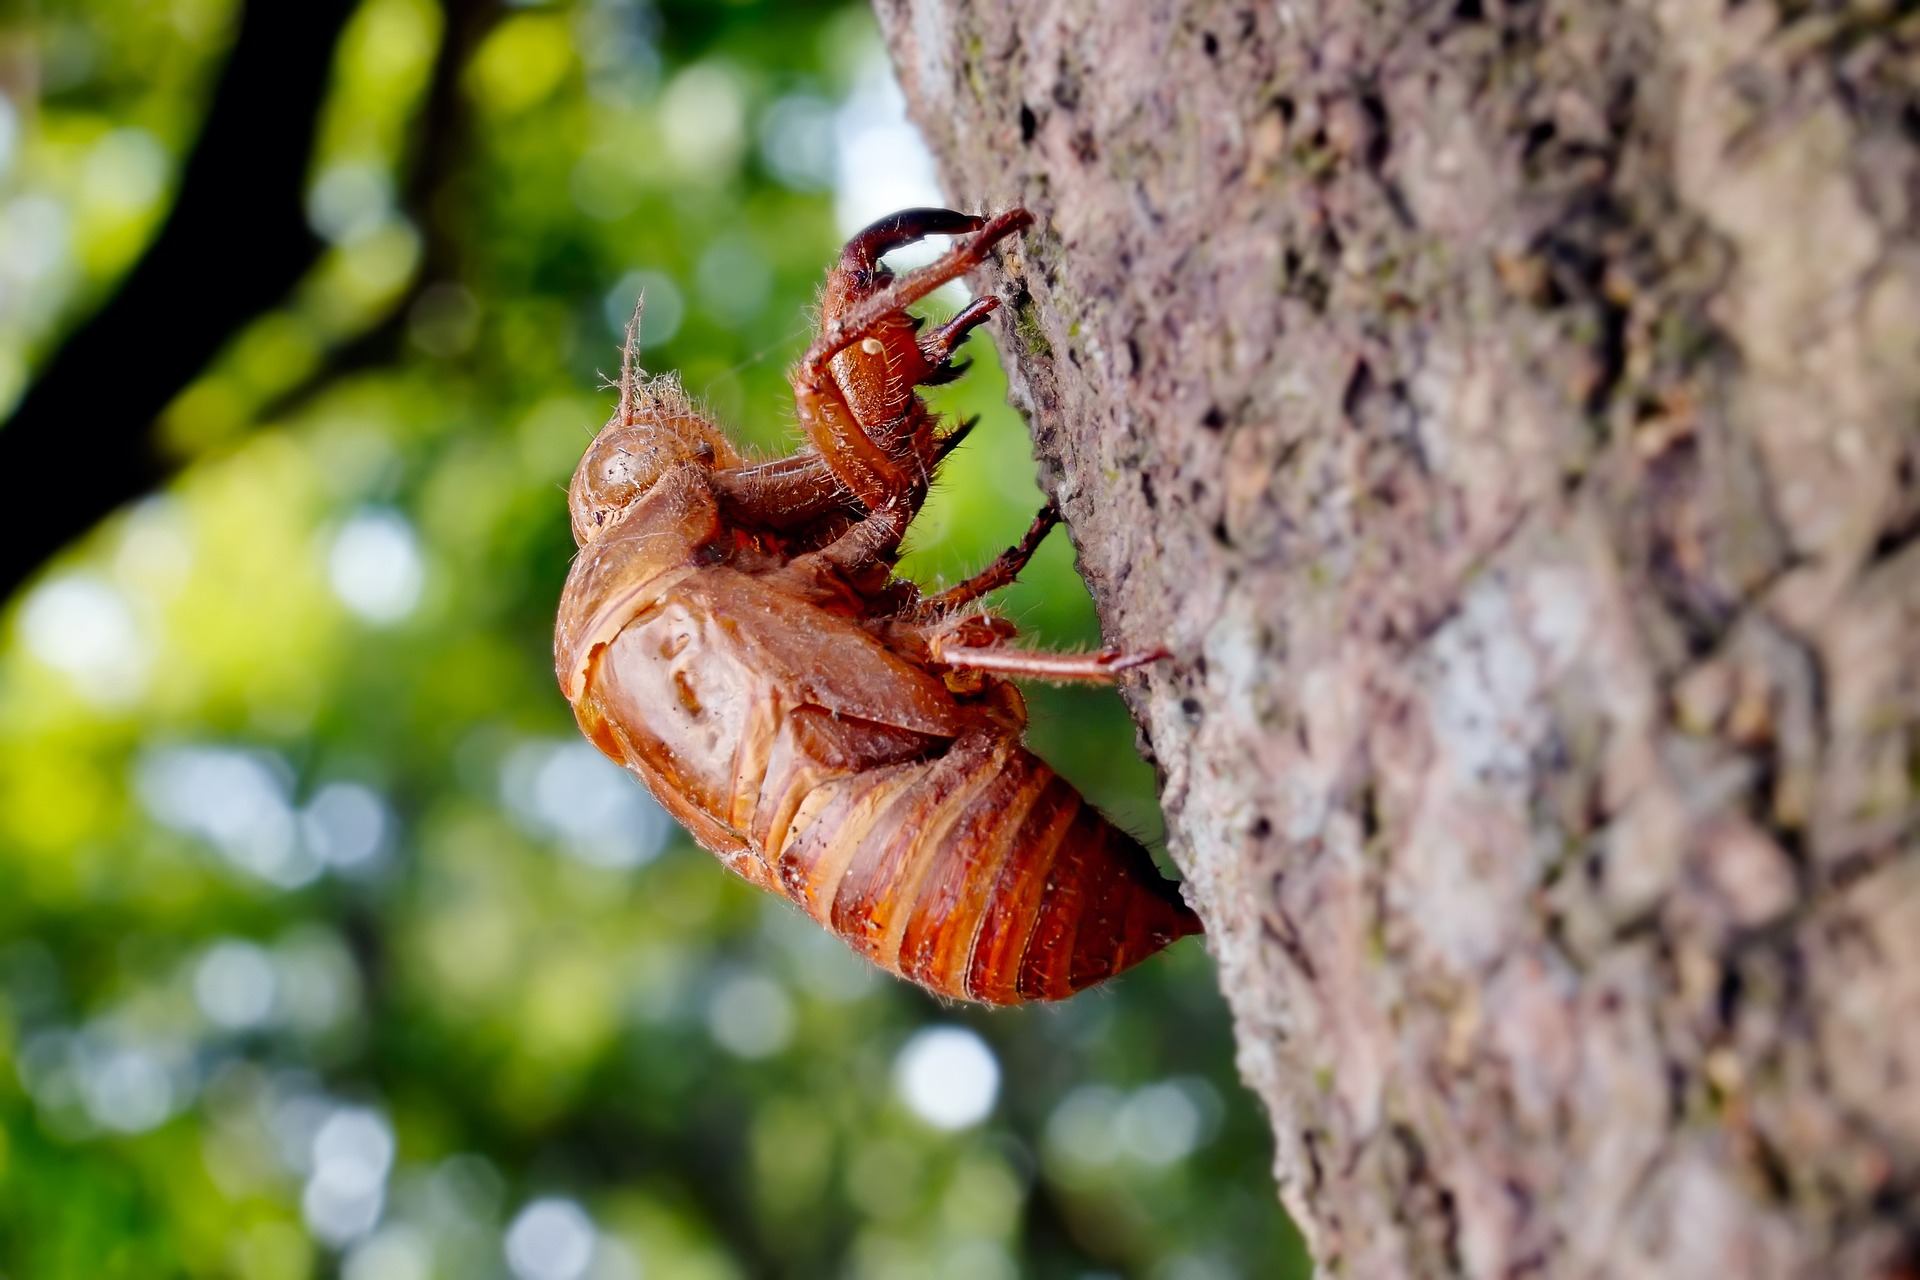 Left over and unneeded cicada shell